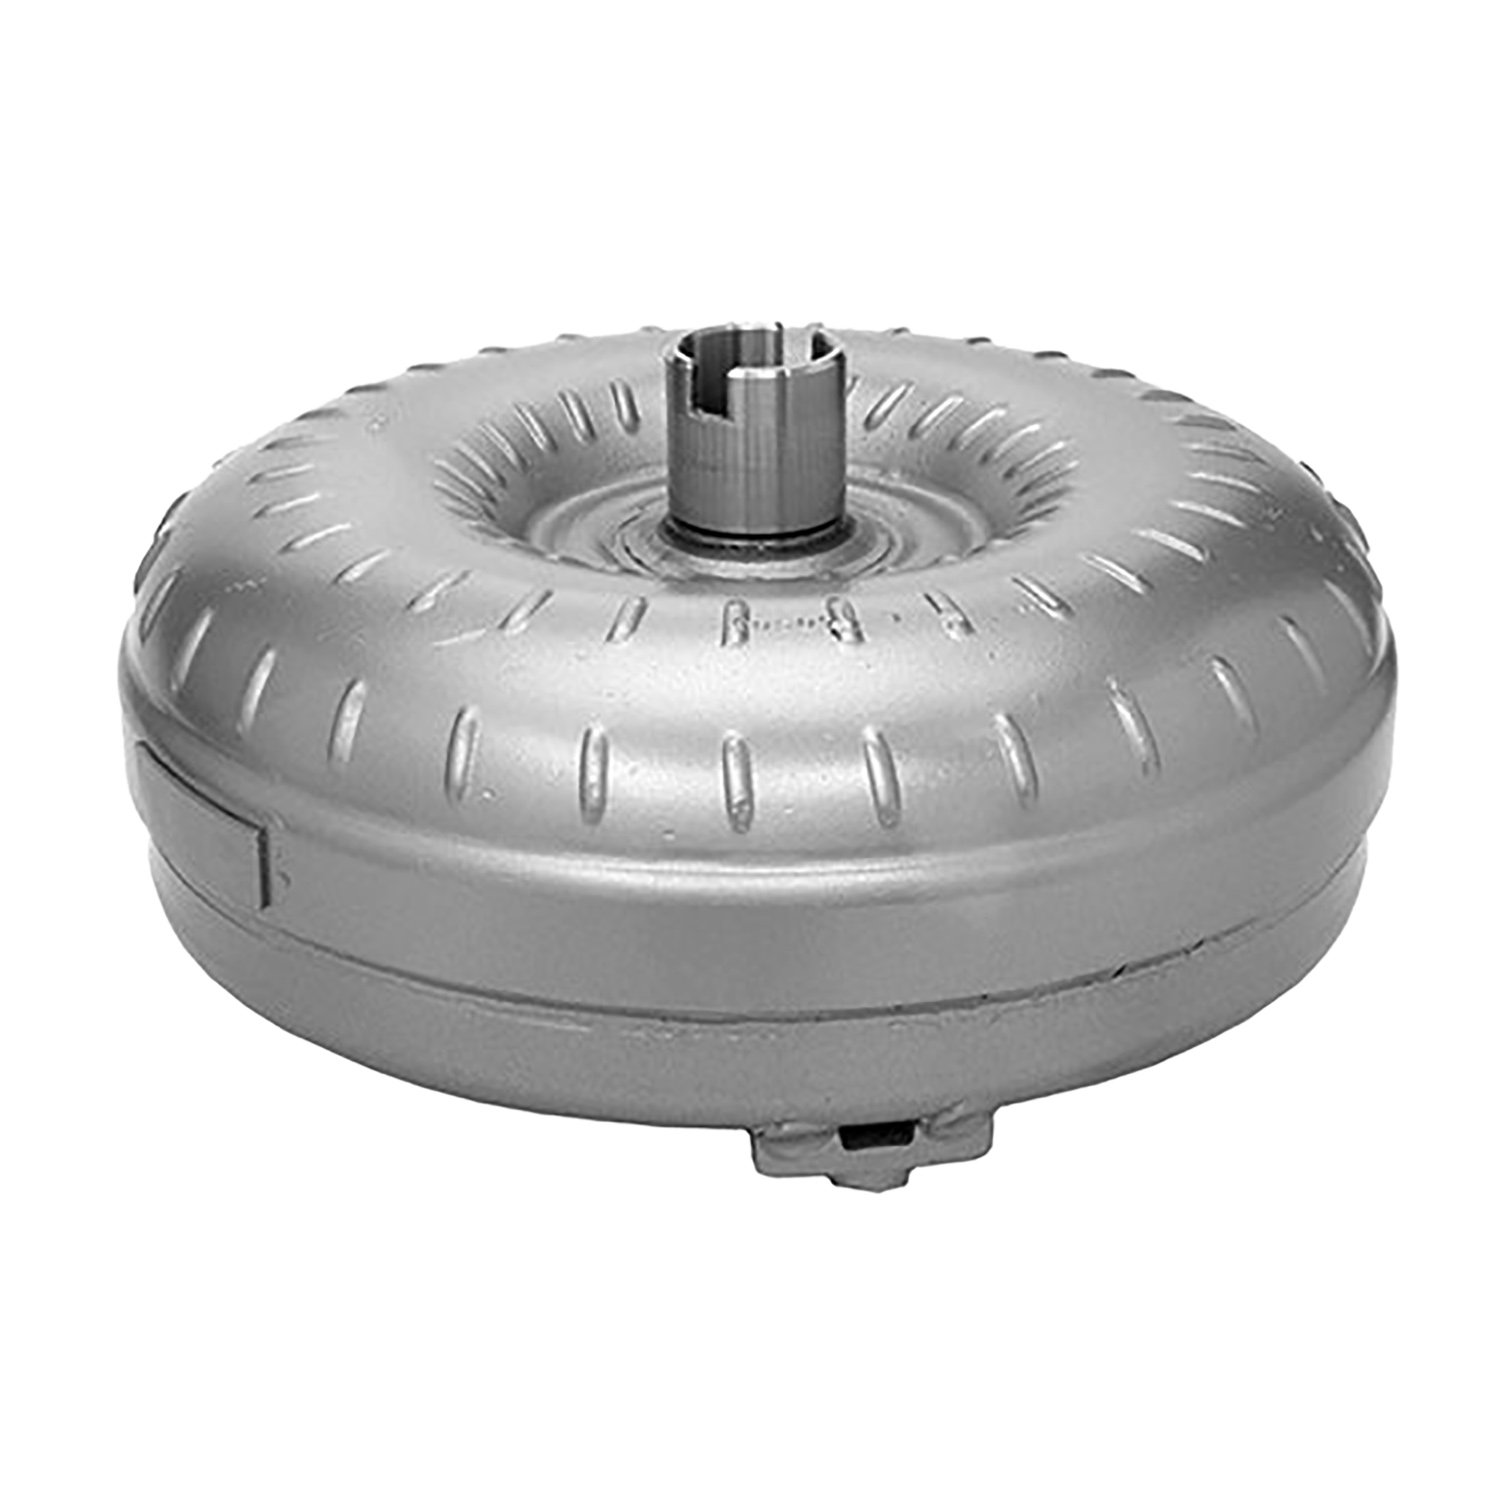 Remanufactured Automatic Transmission Torque Converter for GM TH700R4/4L60 No Cltch HS